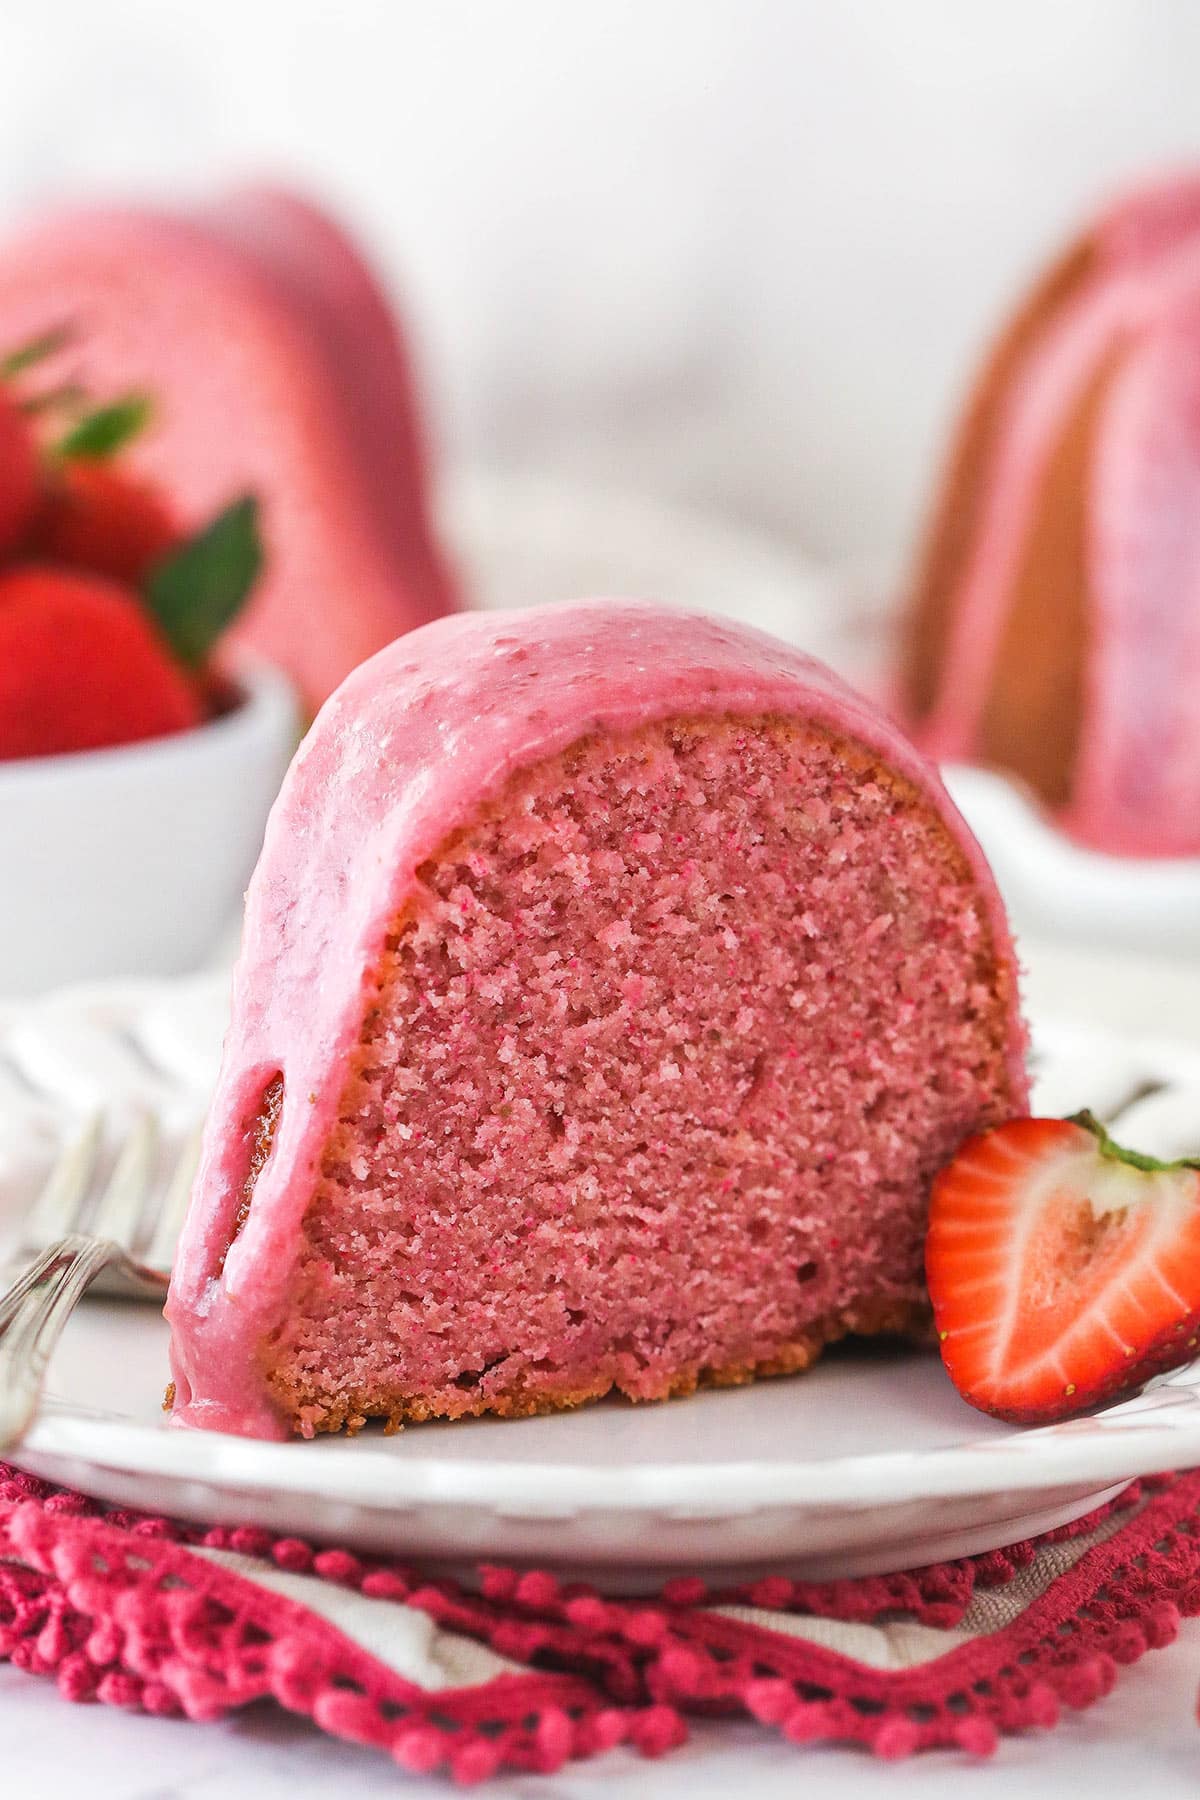 A slice of strawberry pound cake on a plate with a fork and half a fresh strawberry.